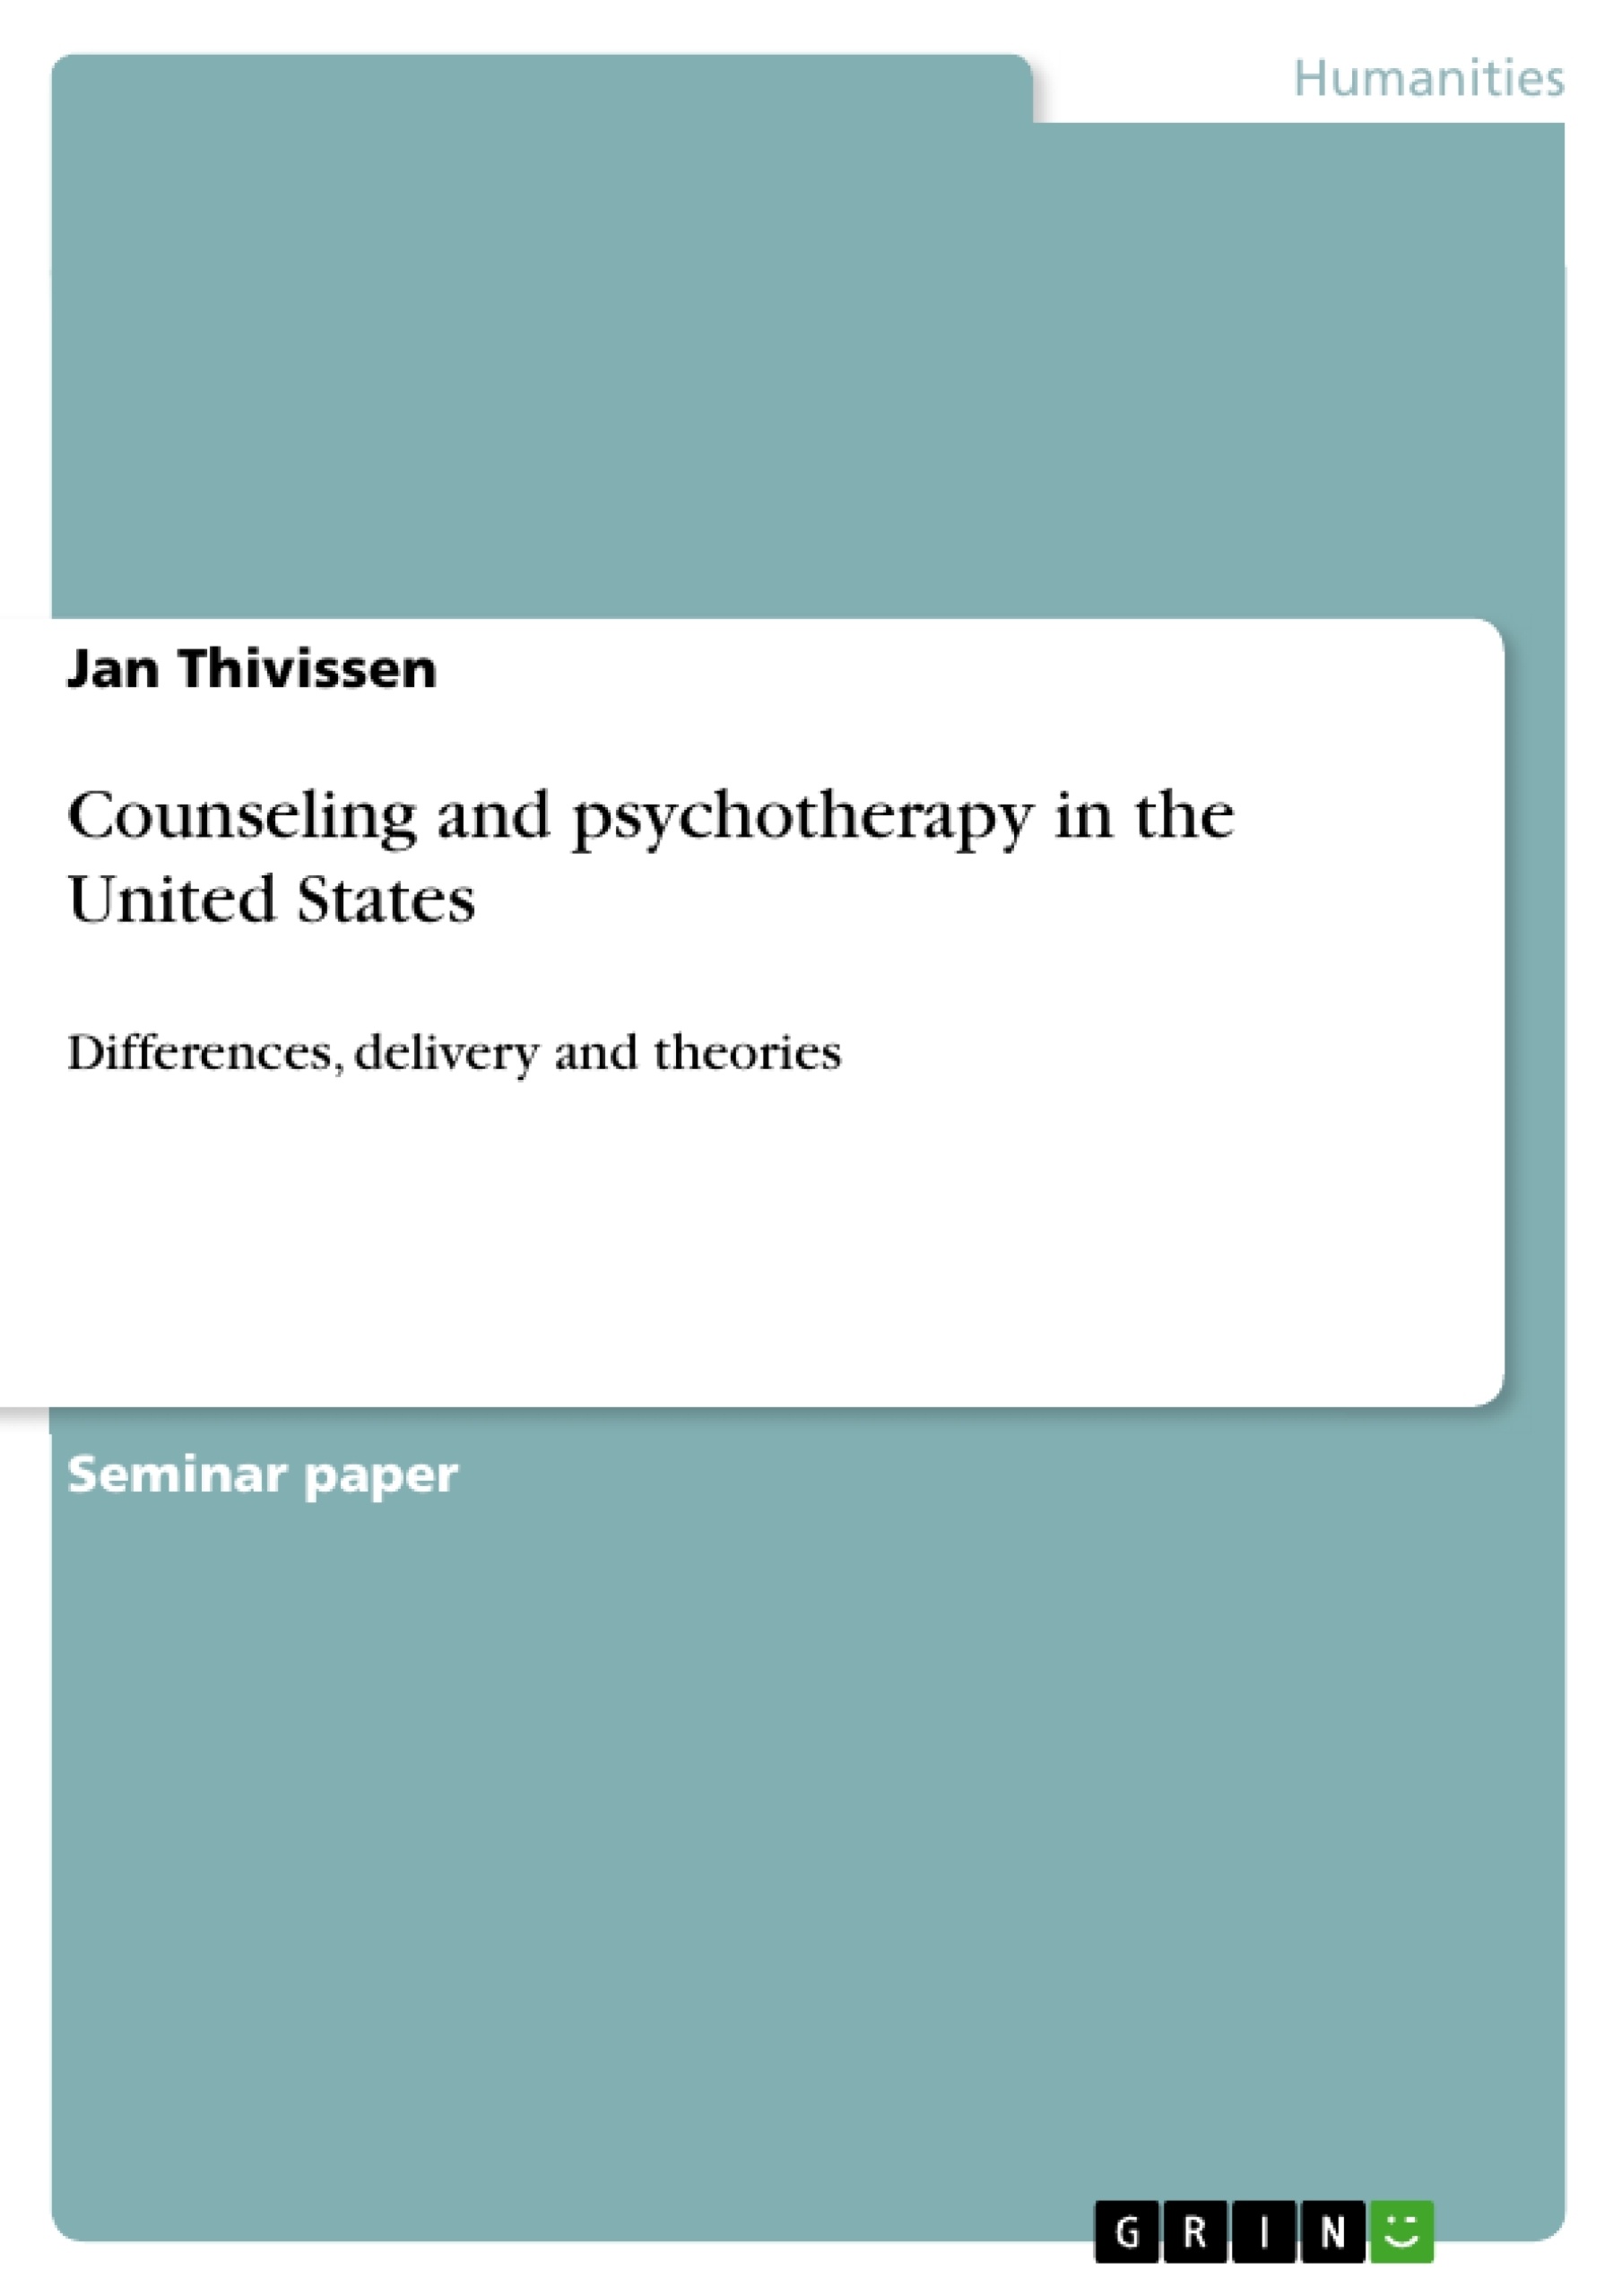 Titre: Counseling and psychotherapy in the United States